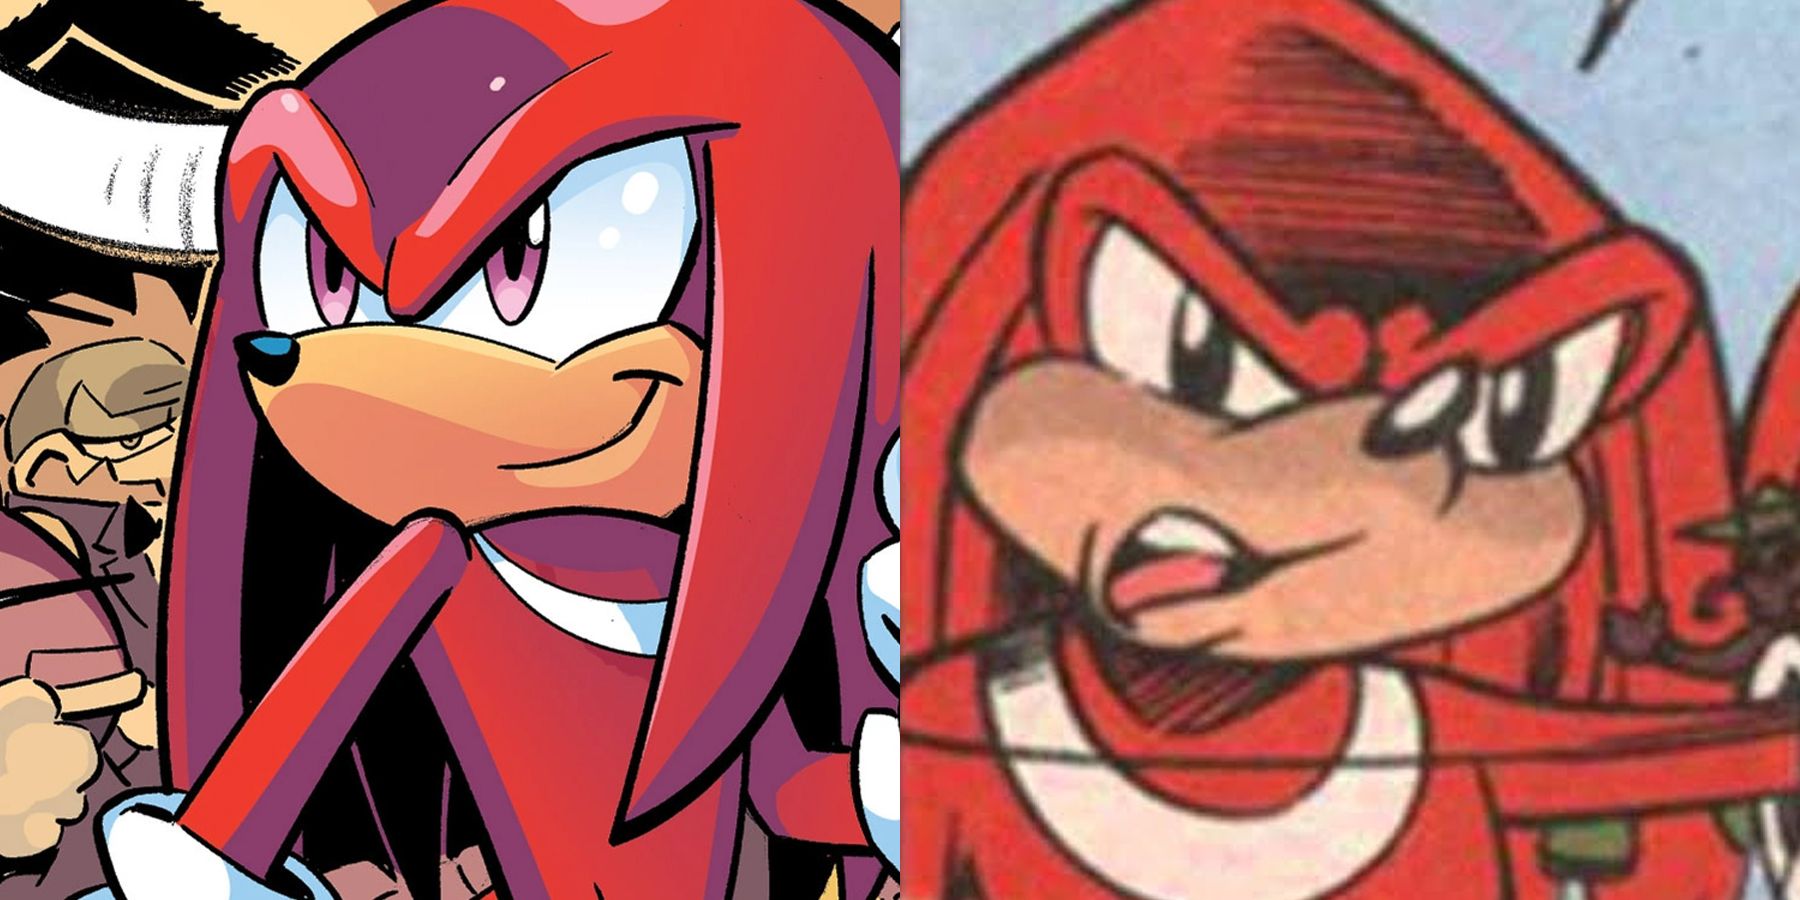 Featured - Trivia about Knuckles the Echidna in the comics